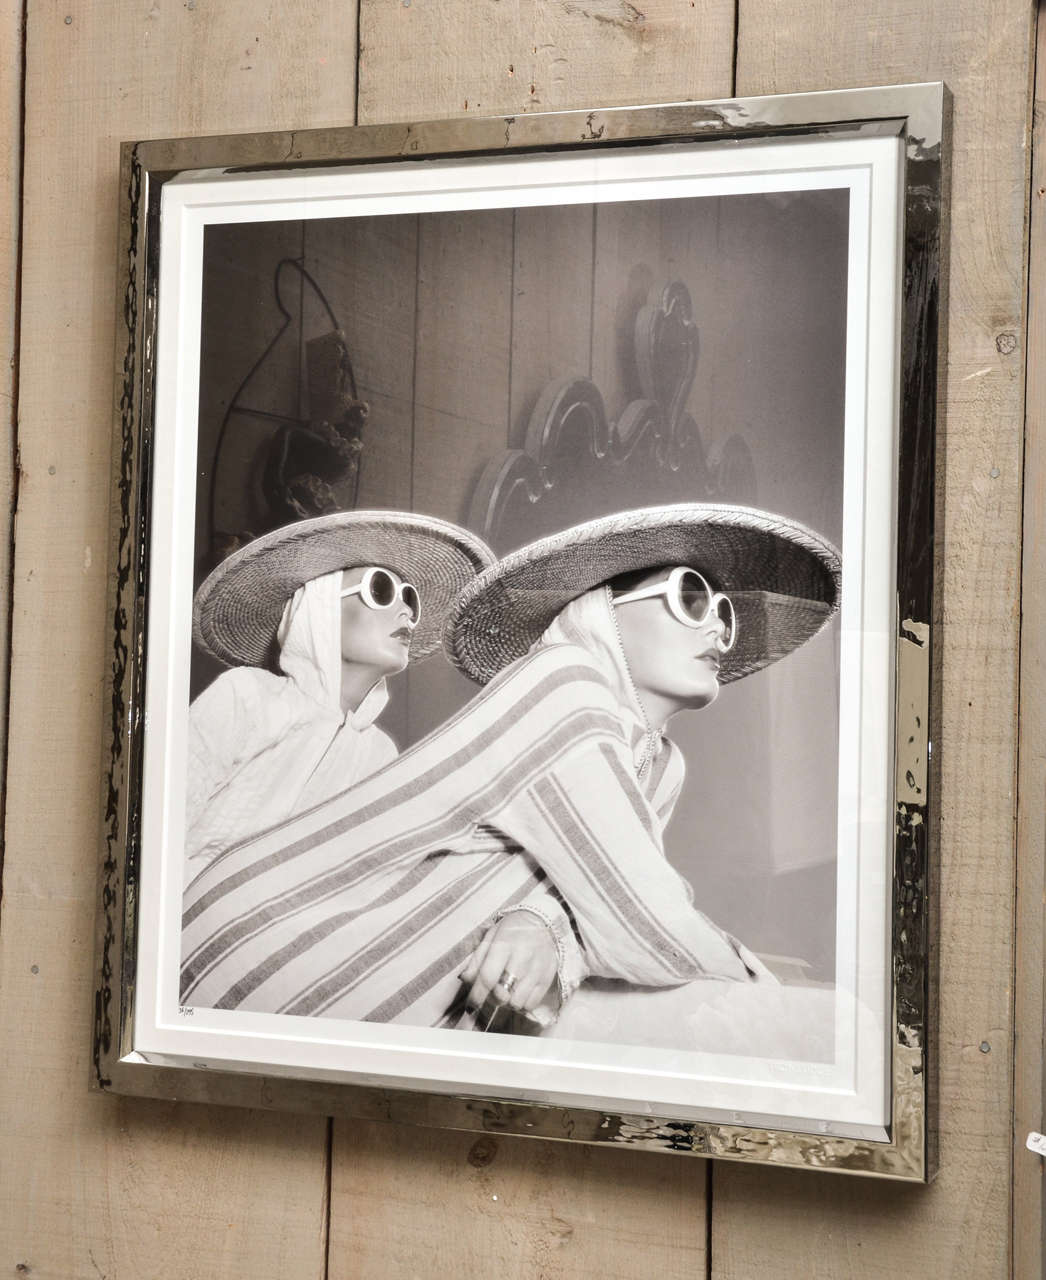 This is one of a series of fashion photographs done by Willie Christie. These photographs were done in the 1970's and 1980's. They are attractively framed in a silver metal frame.